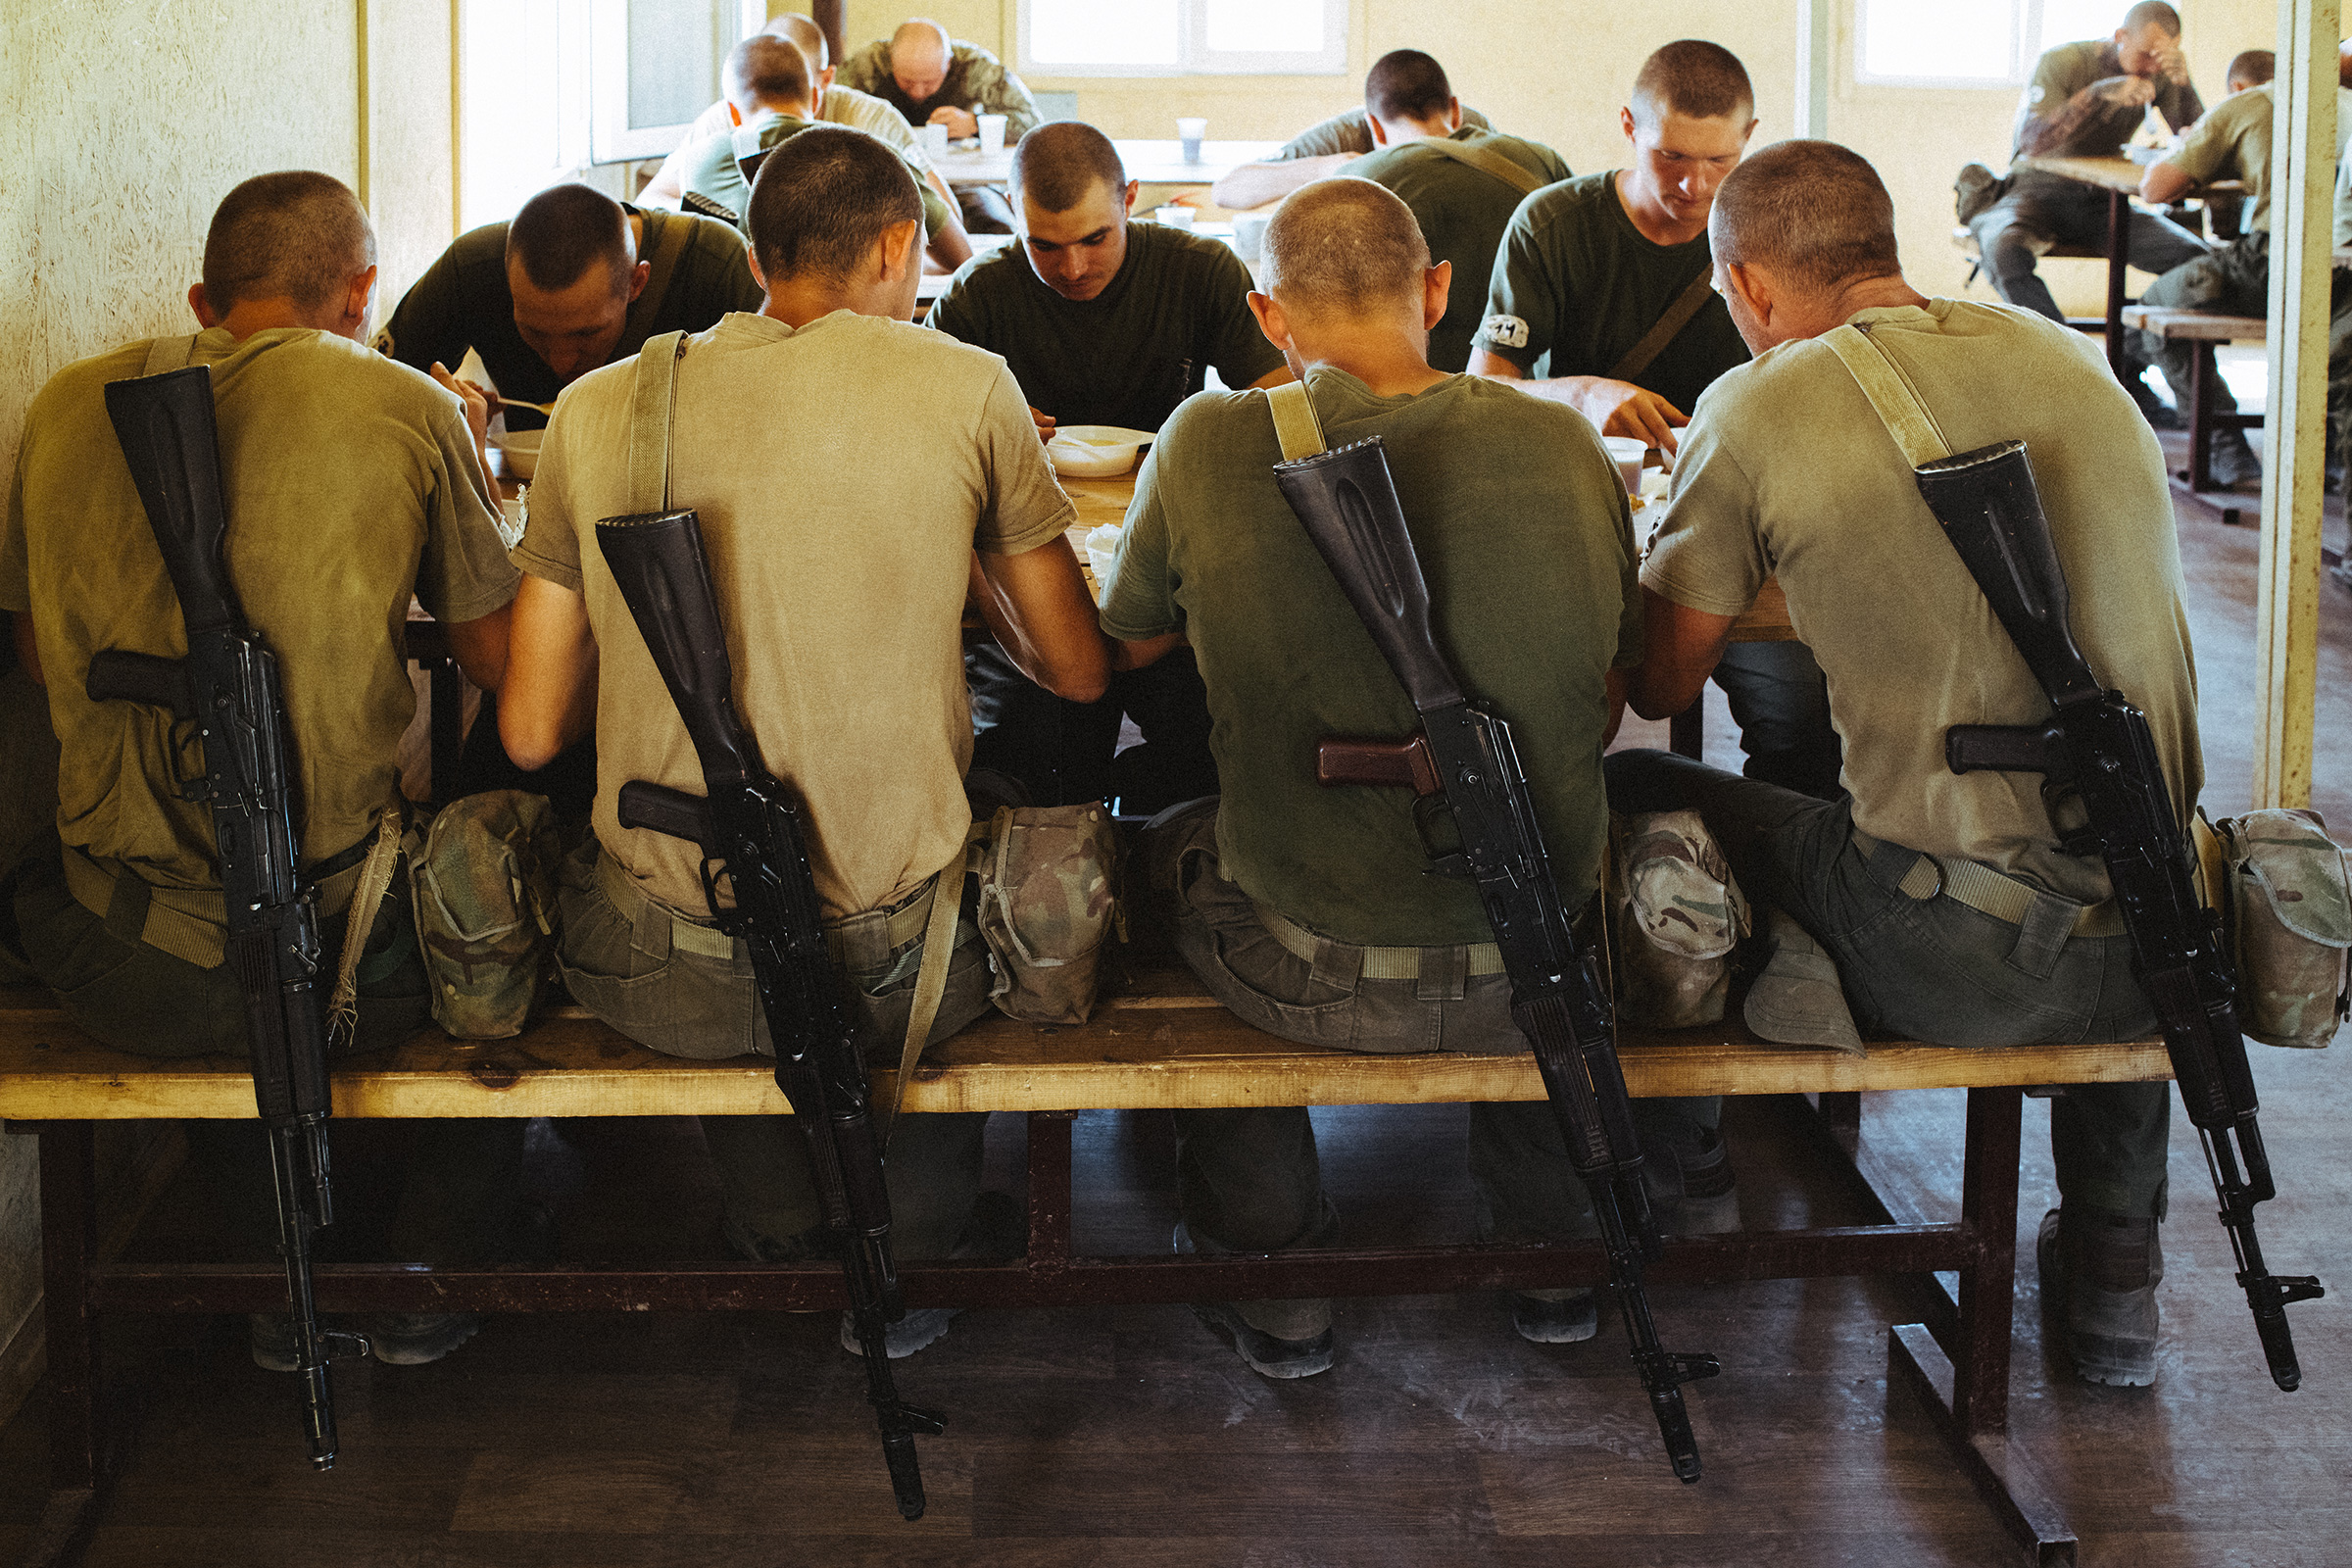 Weapons rest off the backs of recruits during a shared meal. At least since 2018, when the U.S. Congress explicitly barred any U.S. support for Azov, its fighters have been unable to train alongside troops from the U.S.-led NATO alliance. (Maxim Dondyuk for TIME)